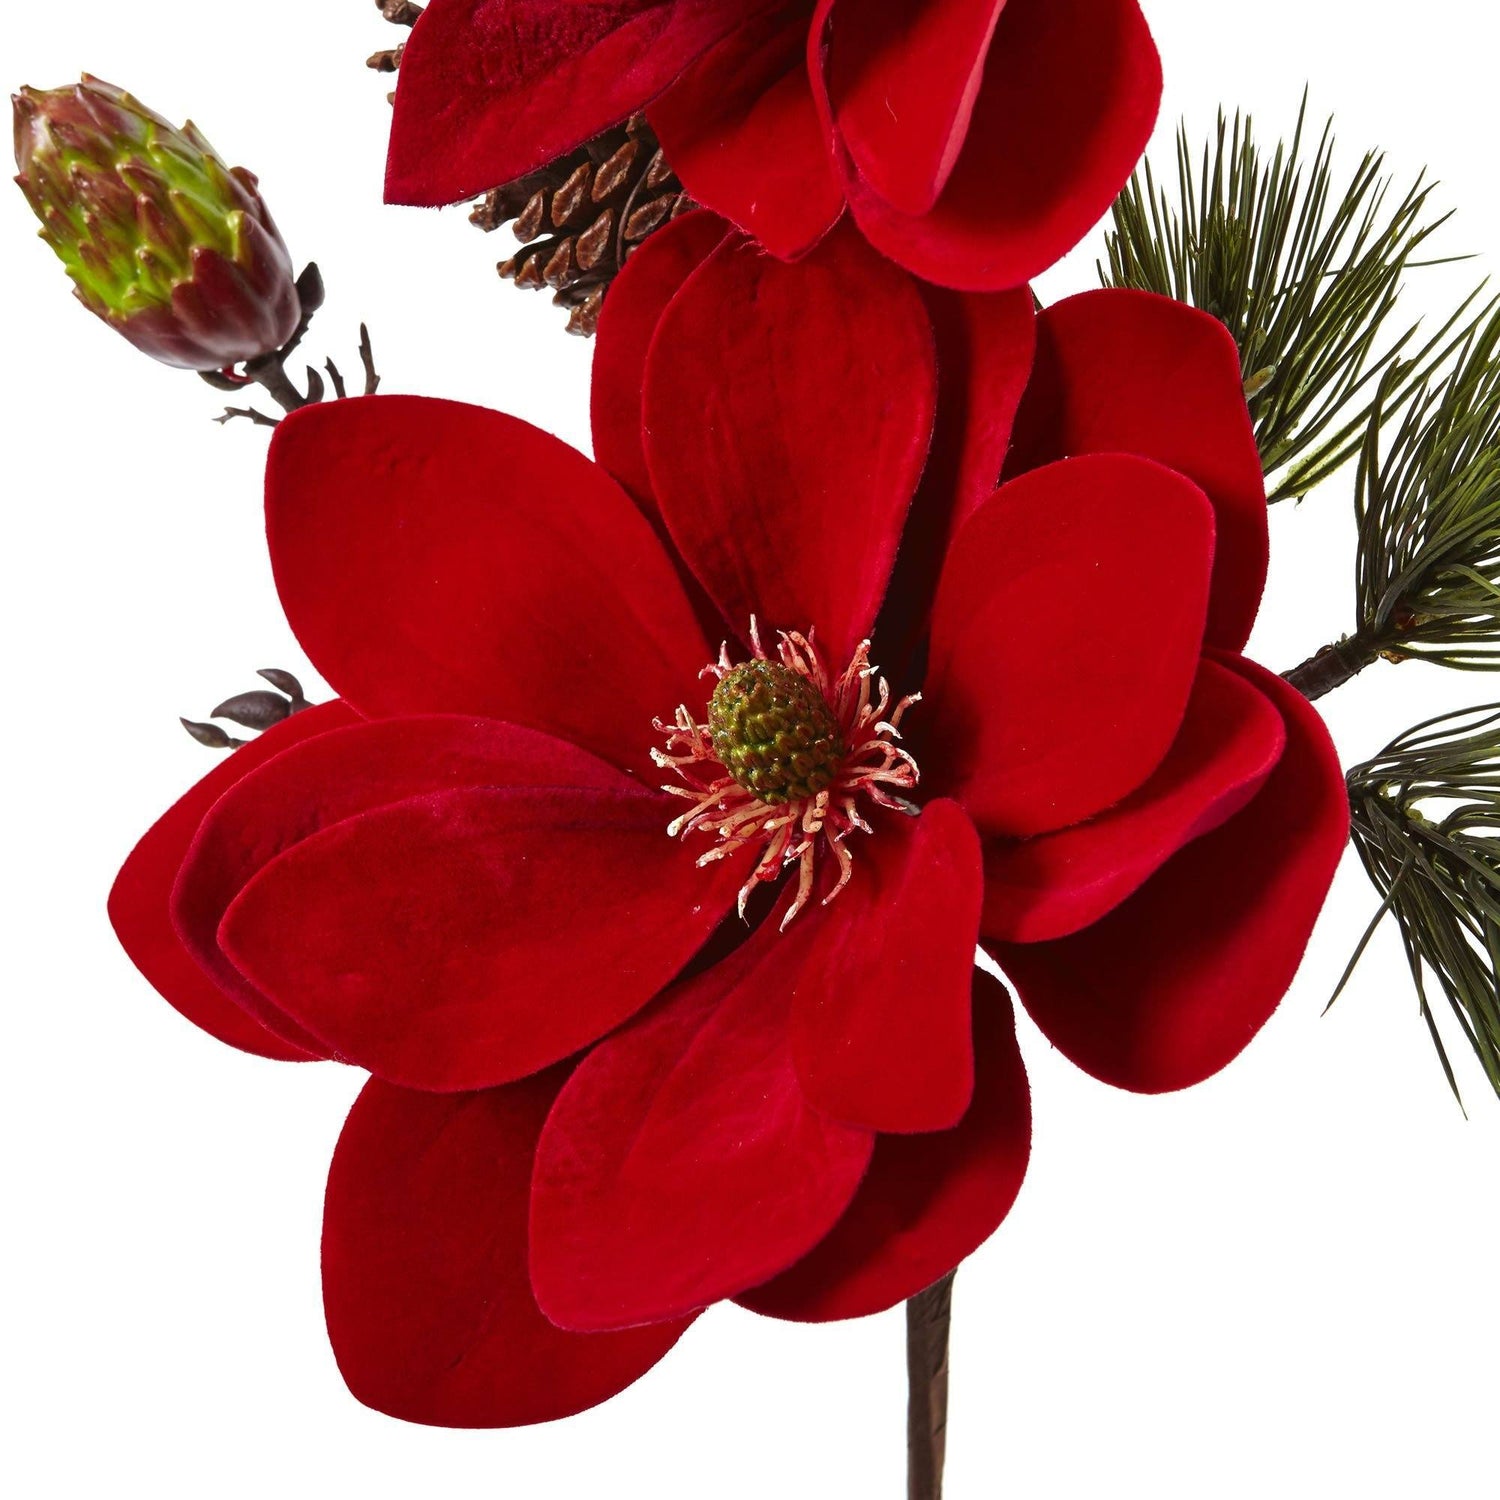 36” Magnolia and Pine Artificial Flower (Set of 2)